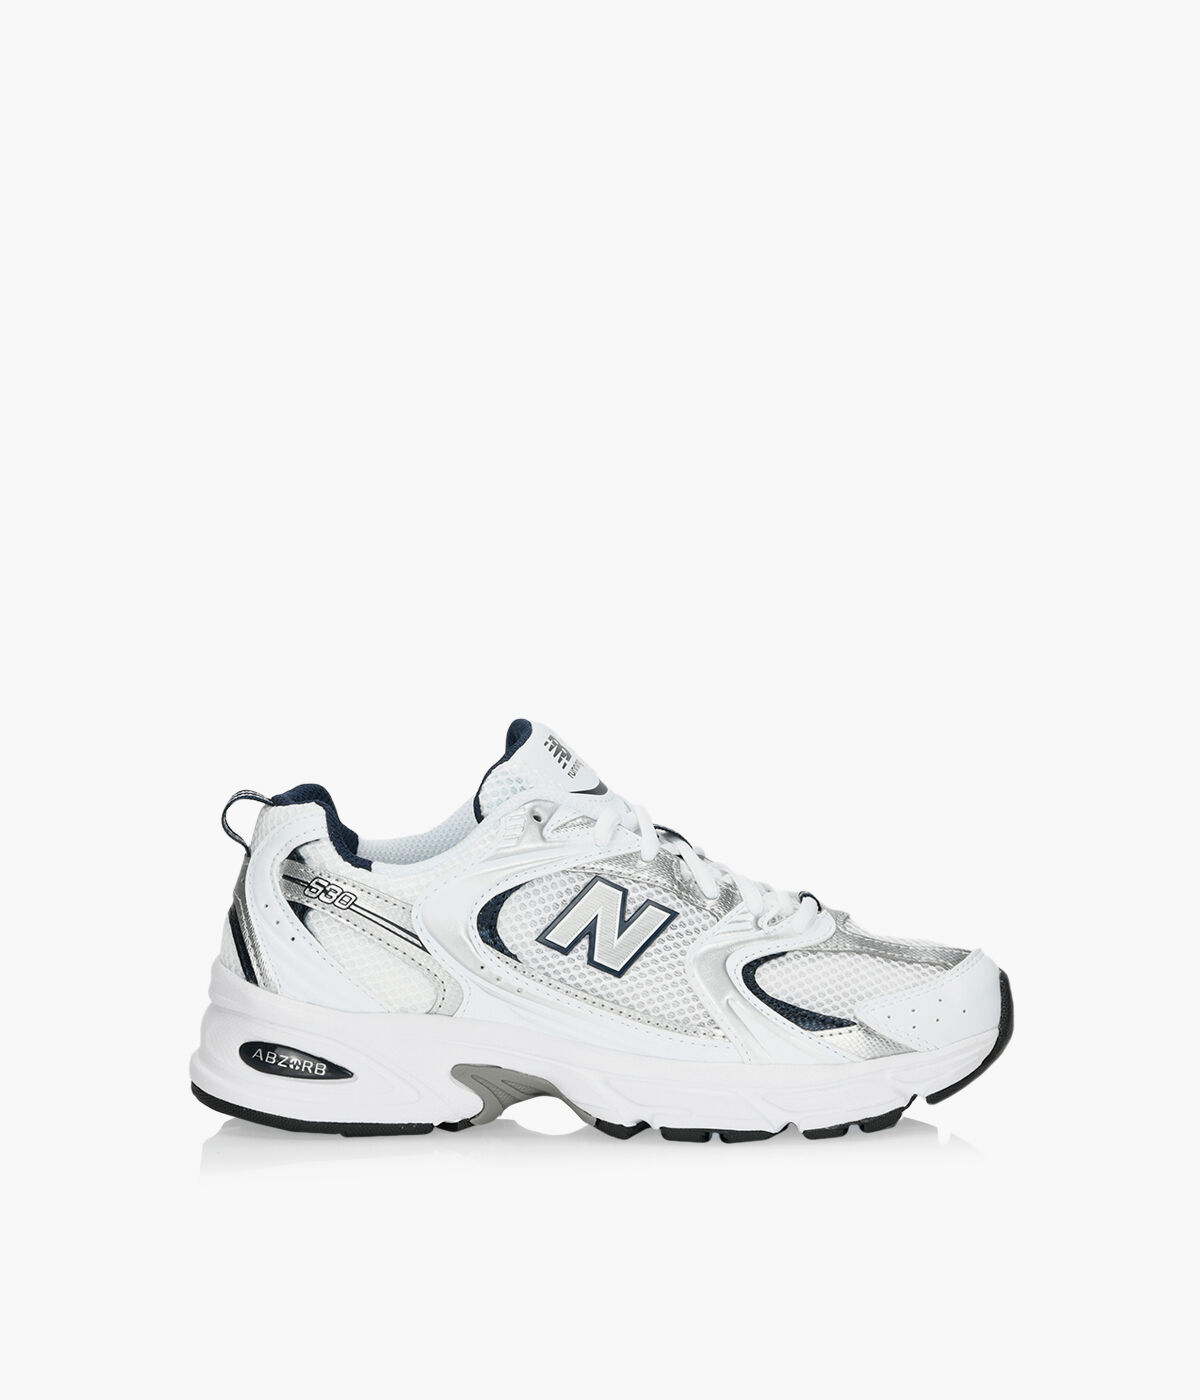 NEW BALANCE 530 - Fabric | Browns Shoes